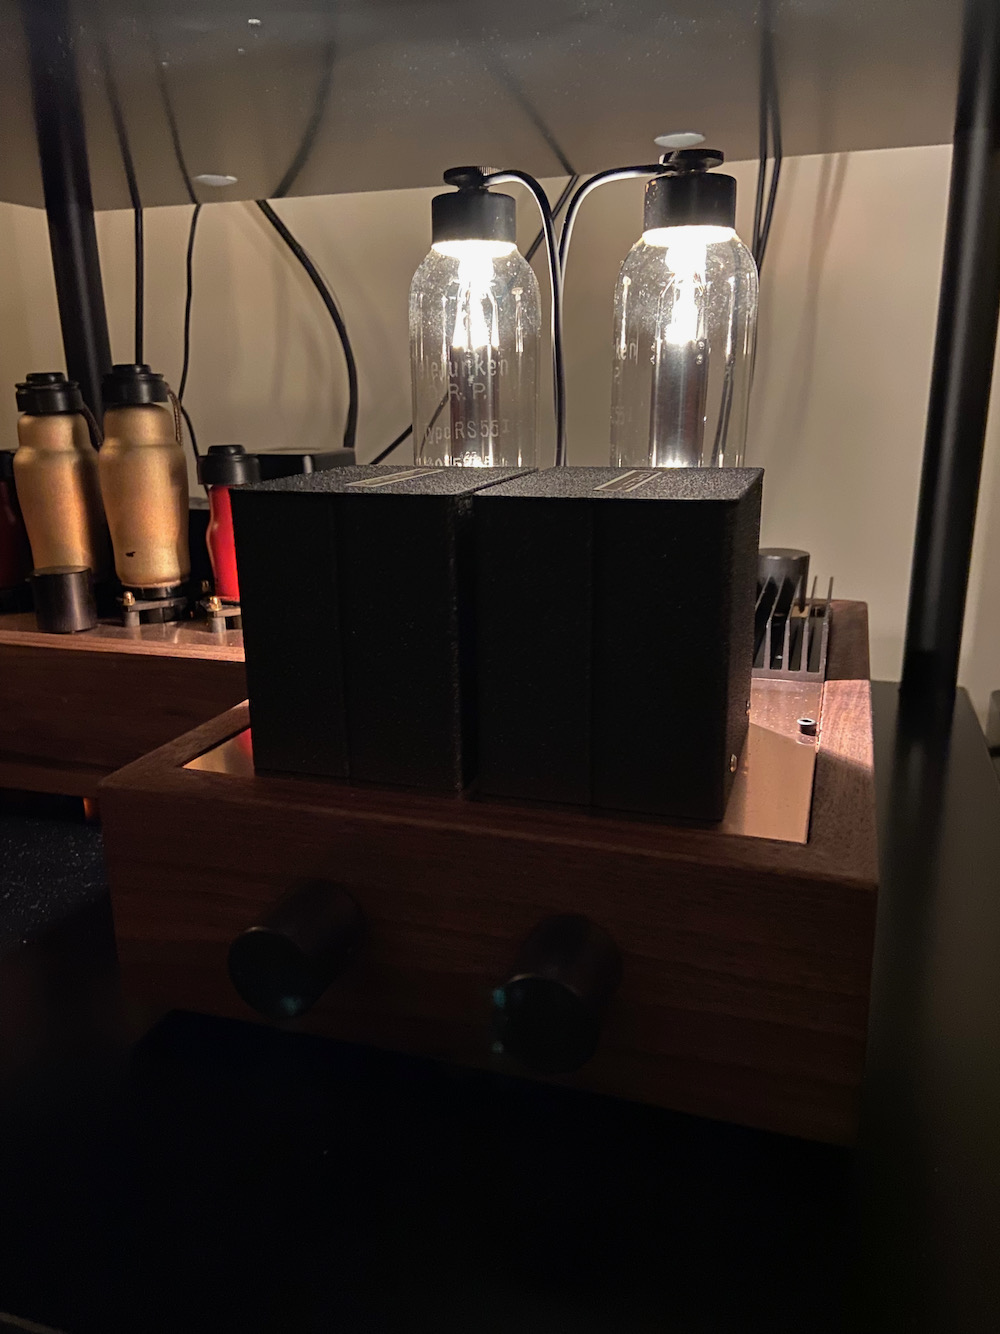 Preamplifier with Monolith and RS55